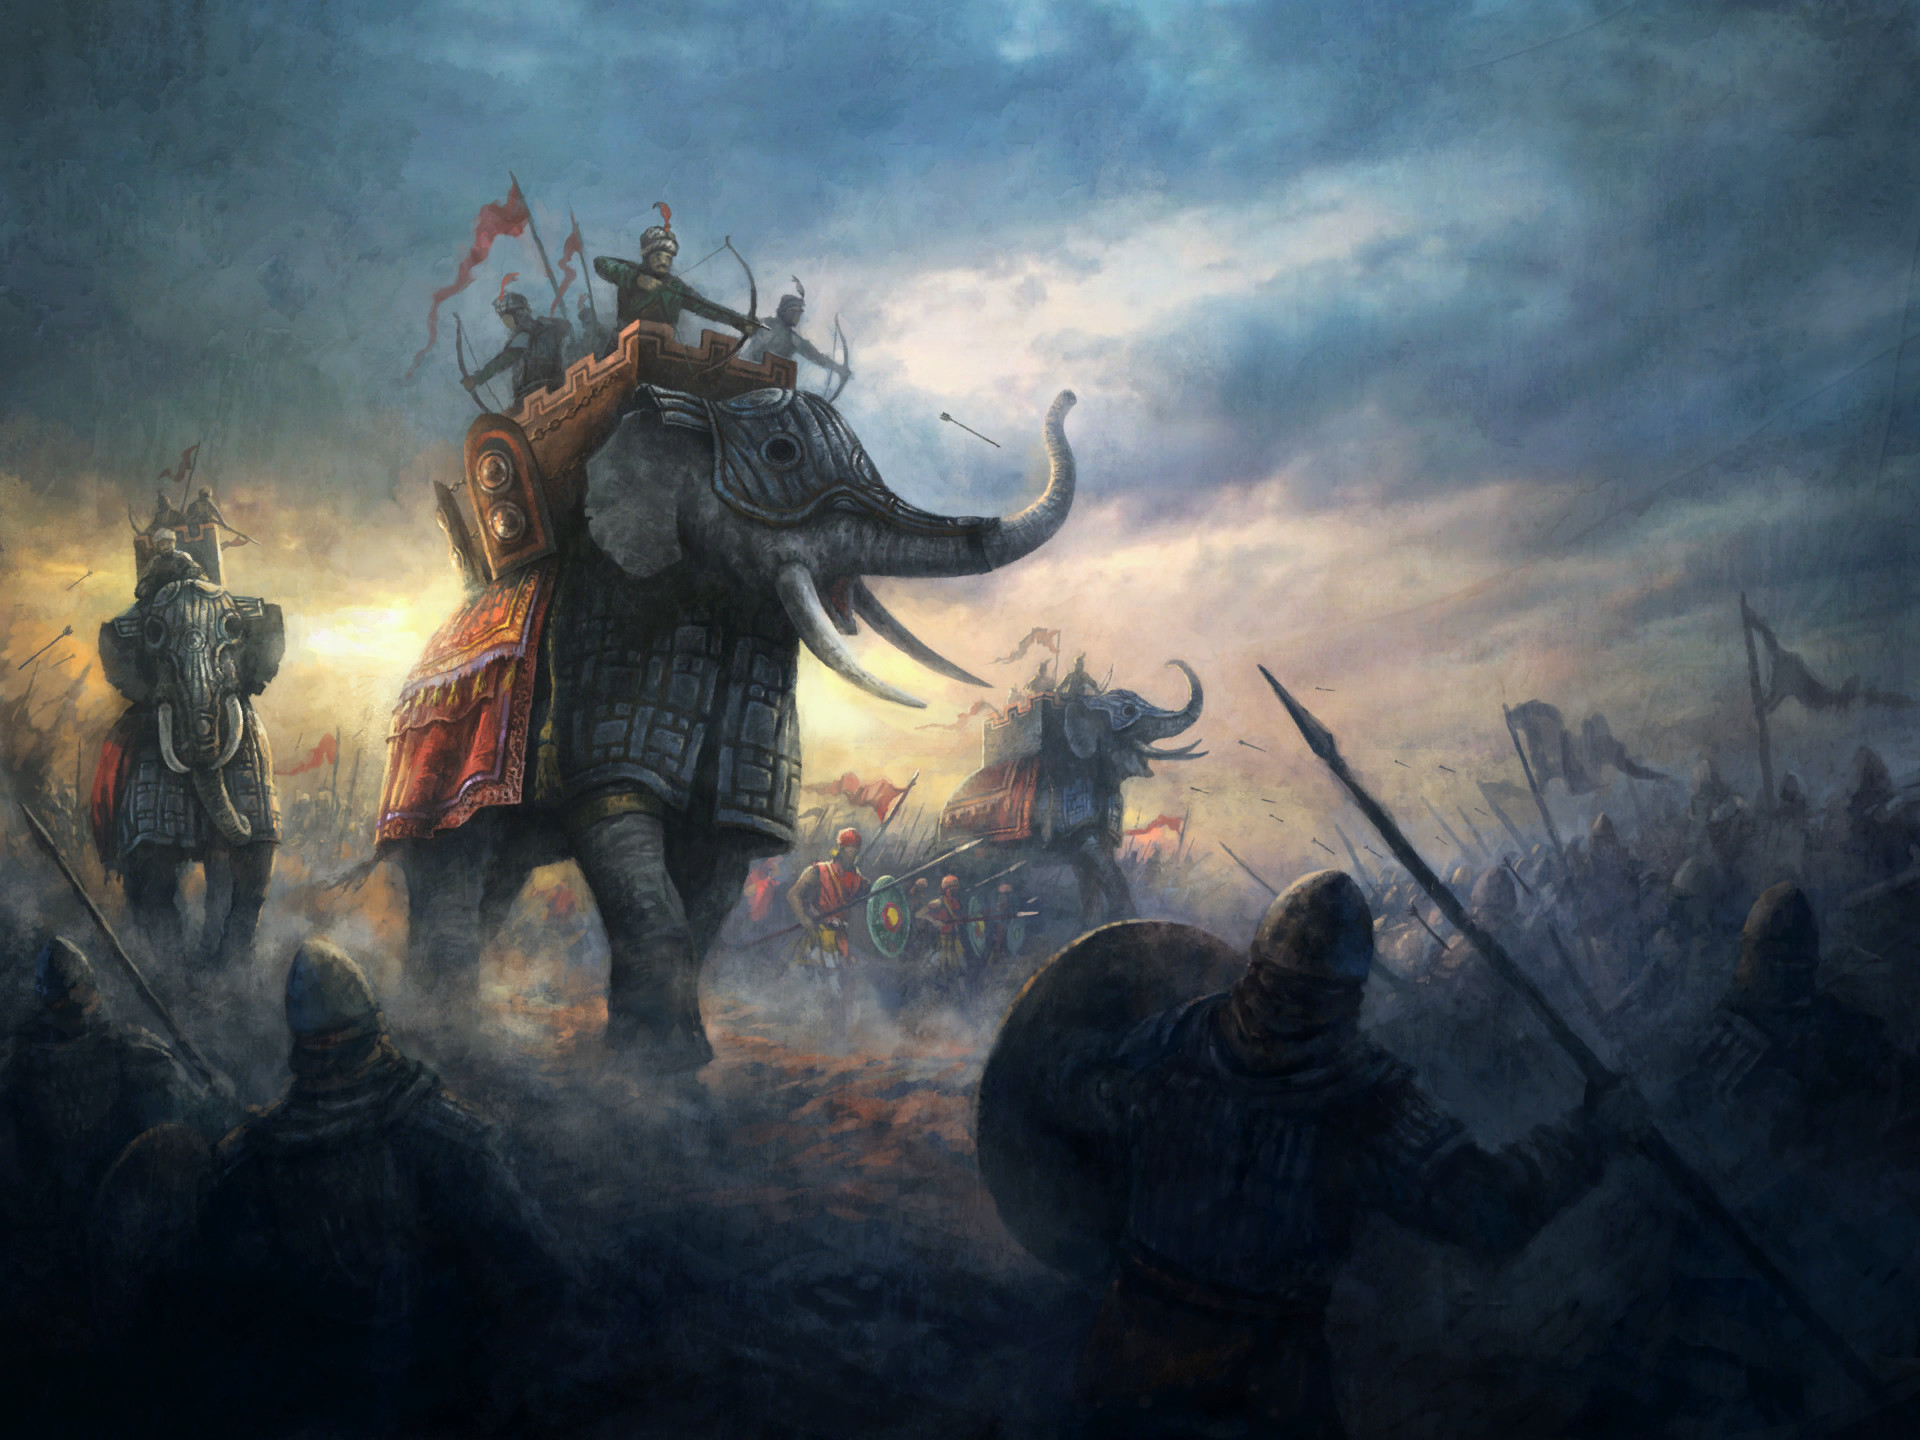 1920x1440 http://news.softpedia.com/news/Exclusive-Crusader-Kings-II-Rajas-of-India-Interview-with-Project-Lead-Henrik-Fahraeus-429067.shtml.  Cheers,